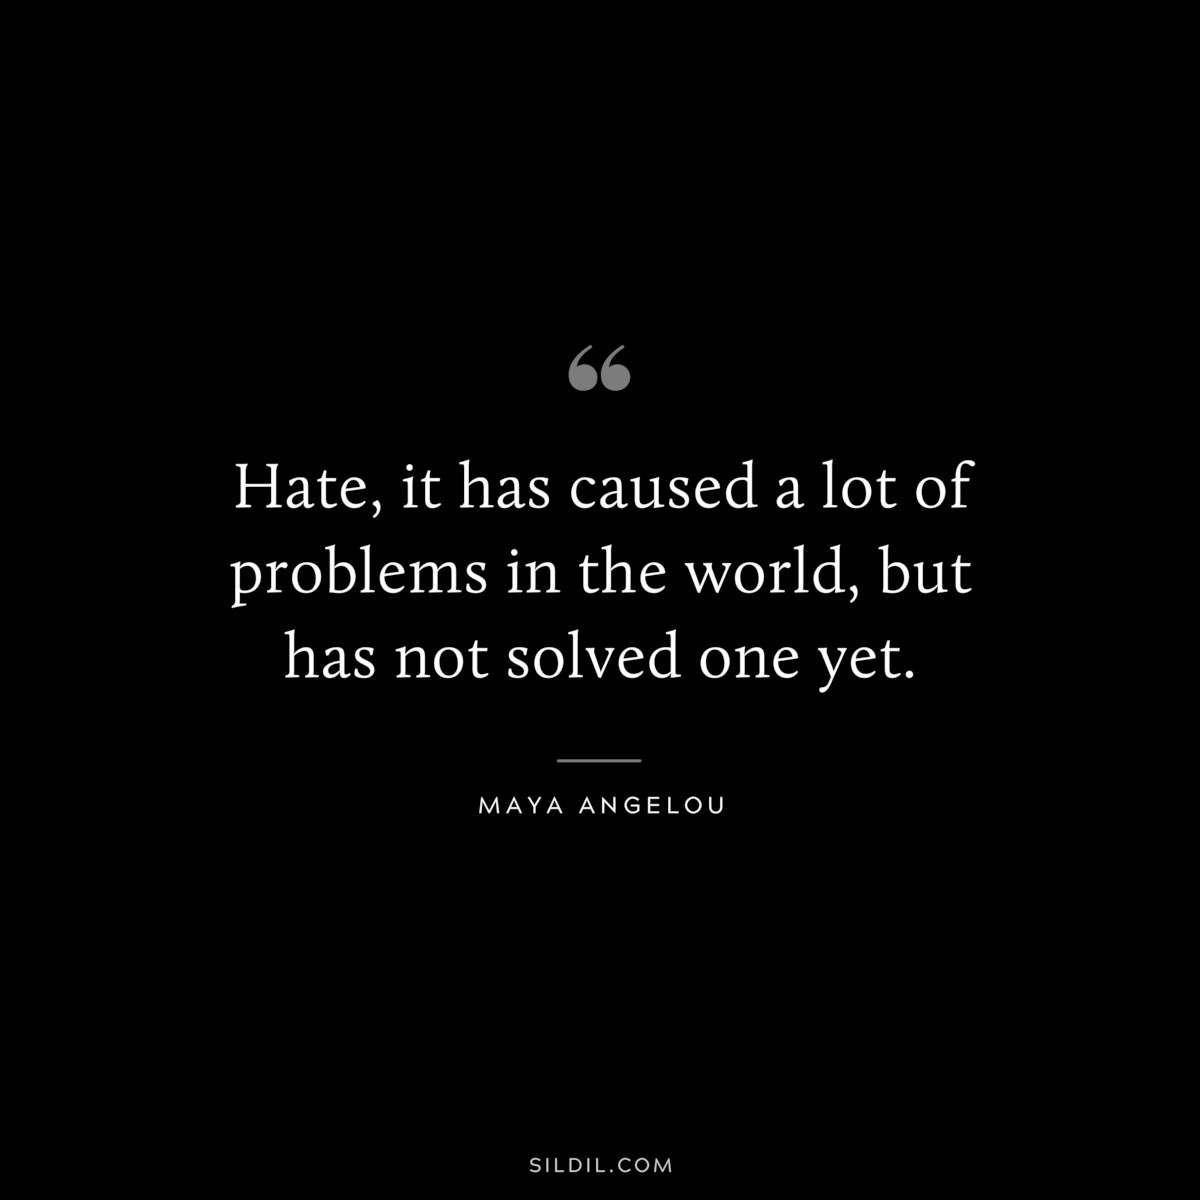 Hate, it has caused a lot of problems in the world, but has not solved one yet. ― Maya Angelou